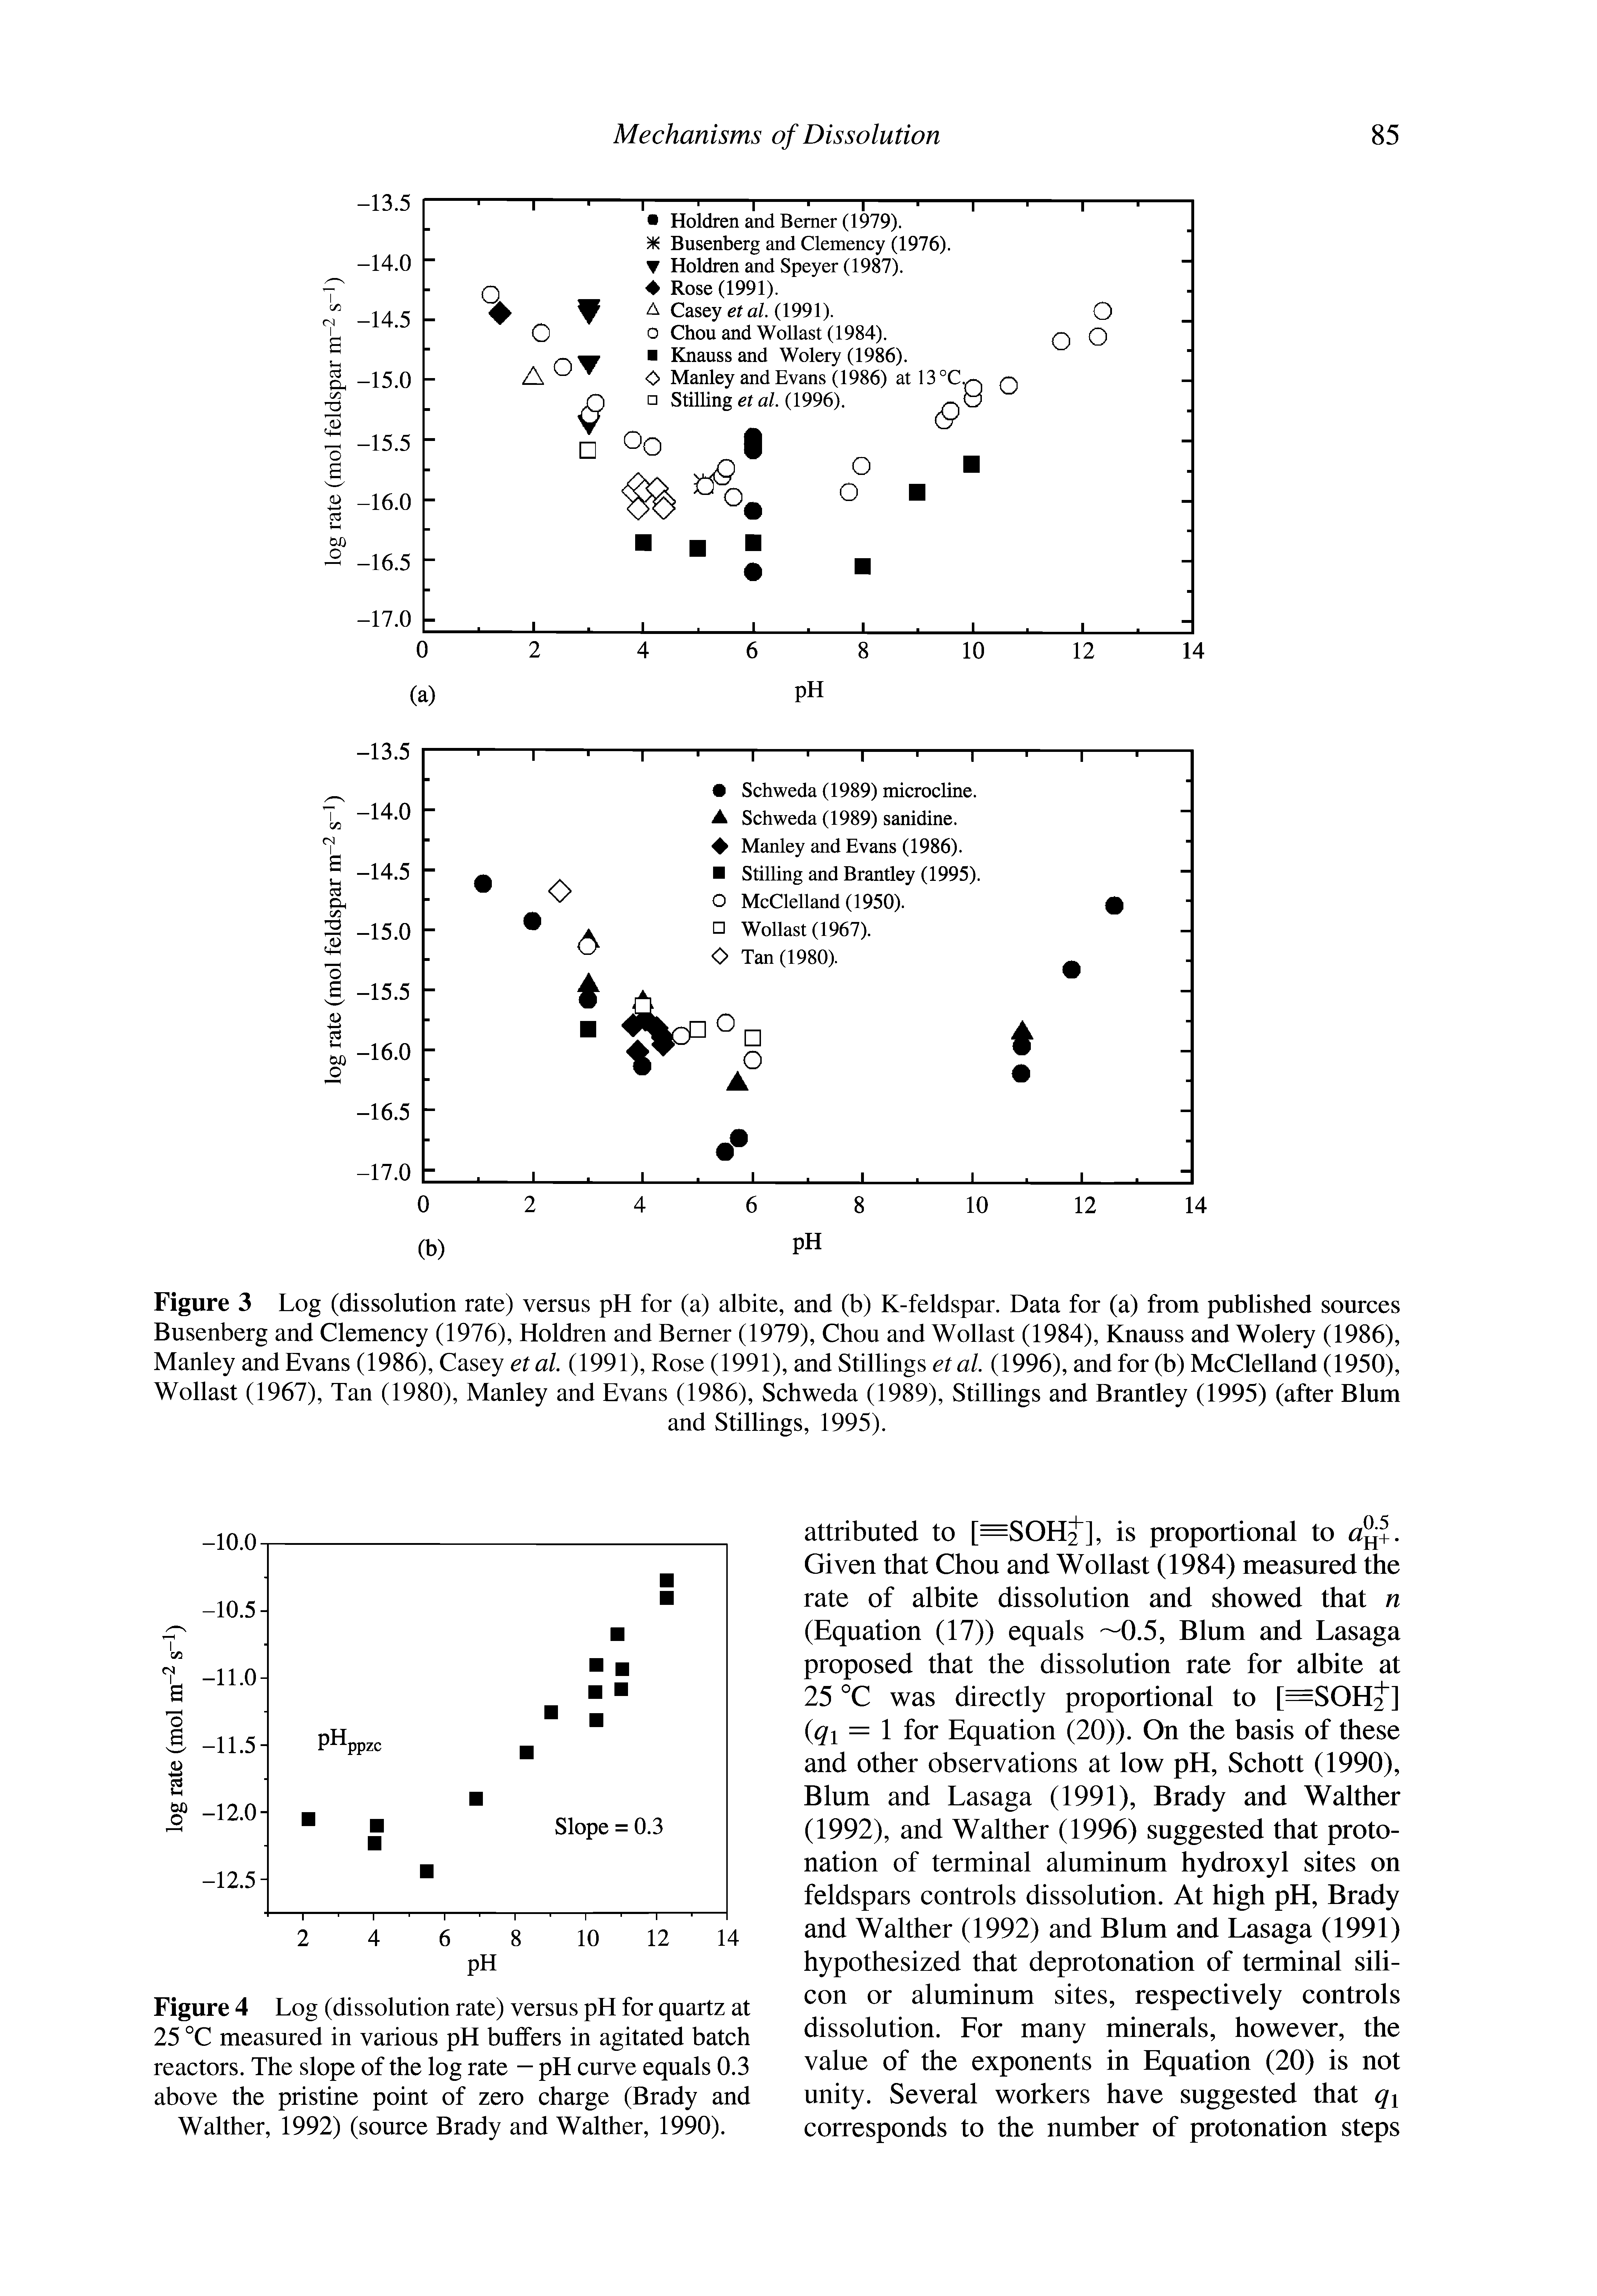 Figure 4 Log (dissolution rate) versus pH for quartz at 25 °C measured in various pH buffers in agitated batch reactors. The slope of the log rate — pH curve equals 0.3 above the pristine point of zero charge (Brady and Walther, 1992) (source Brady and Walther, 1990).